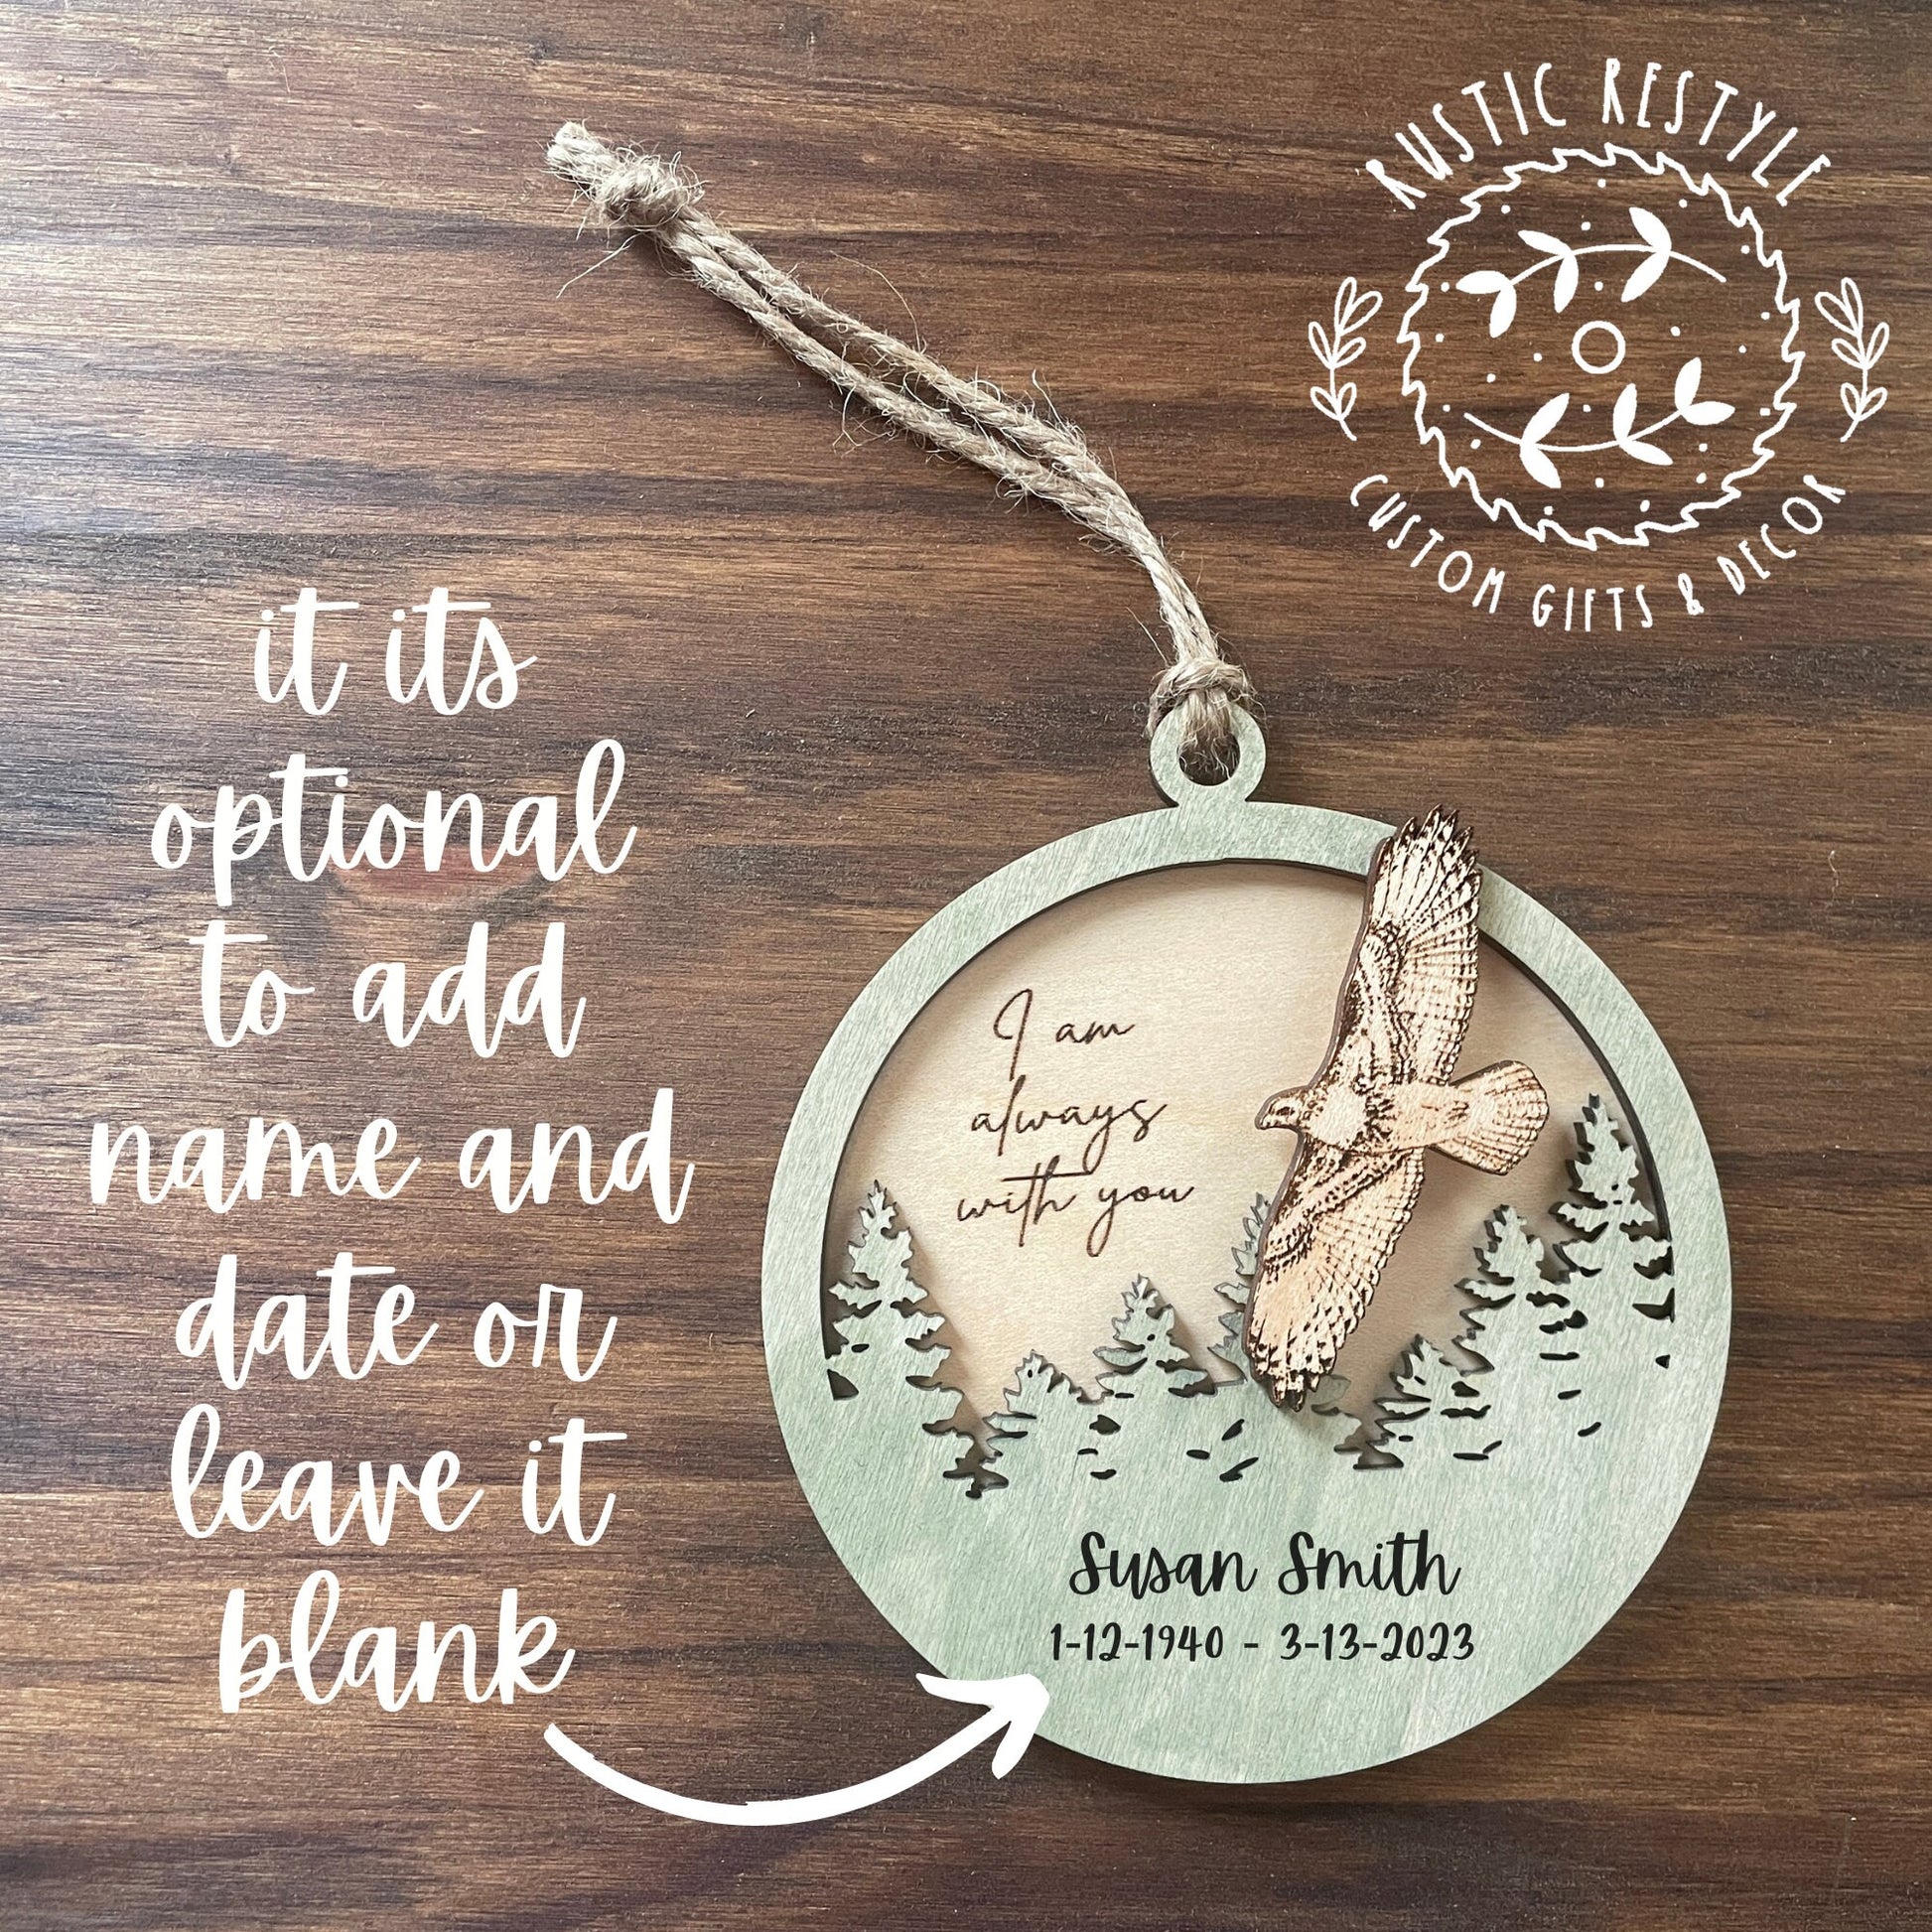 Memorial Hawk Remembrance ornament, 4inch hawk remeberance hanger can be personalized with engraved names